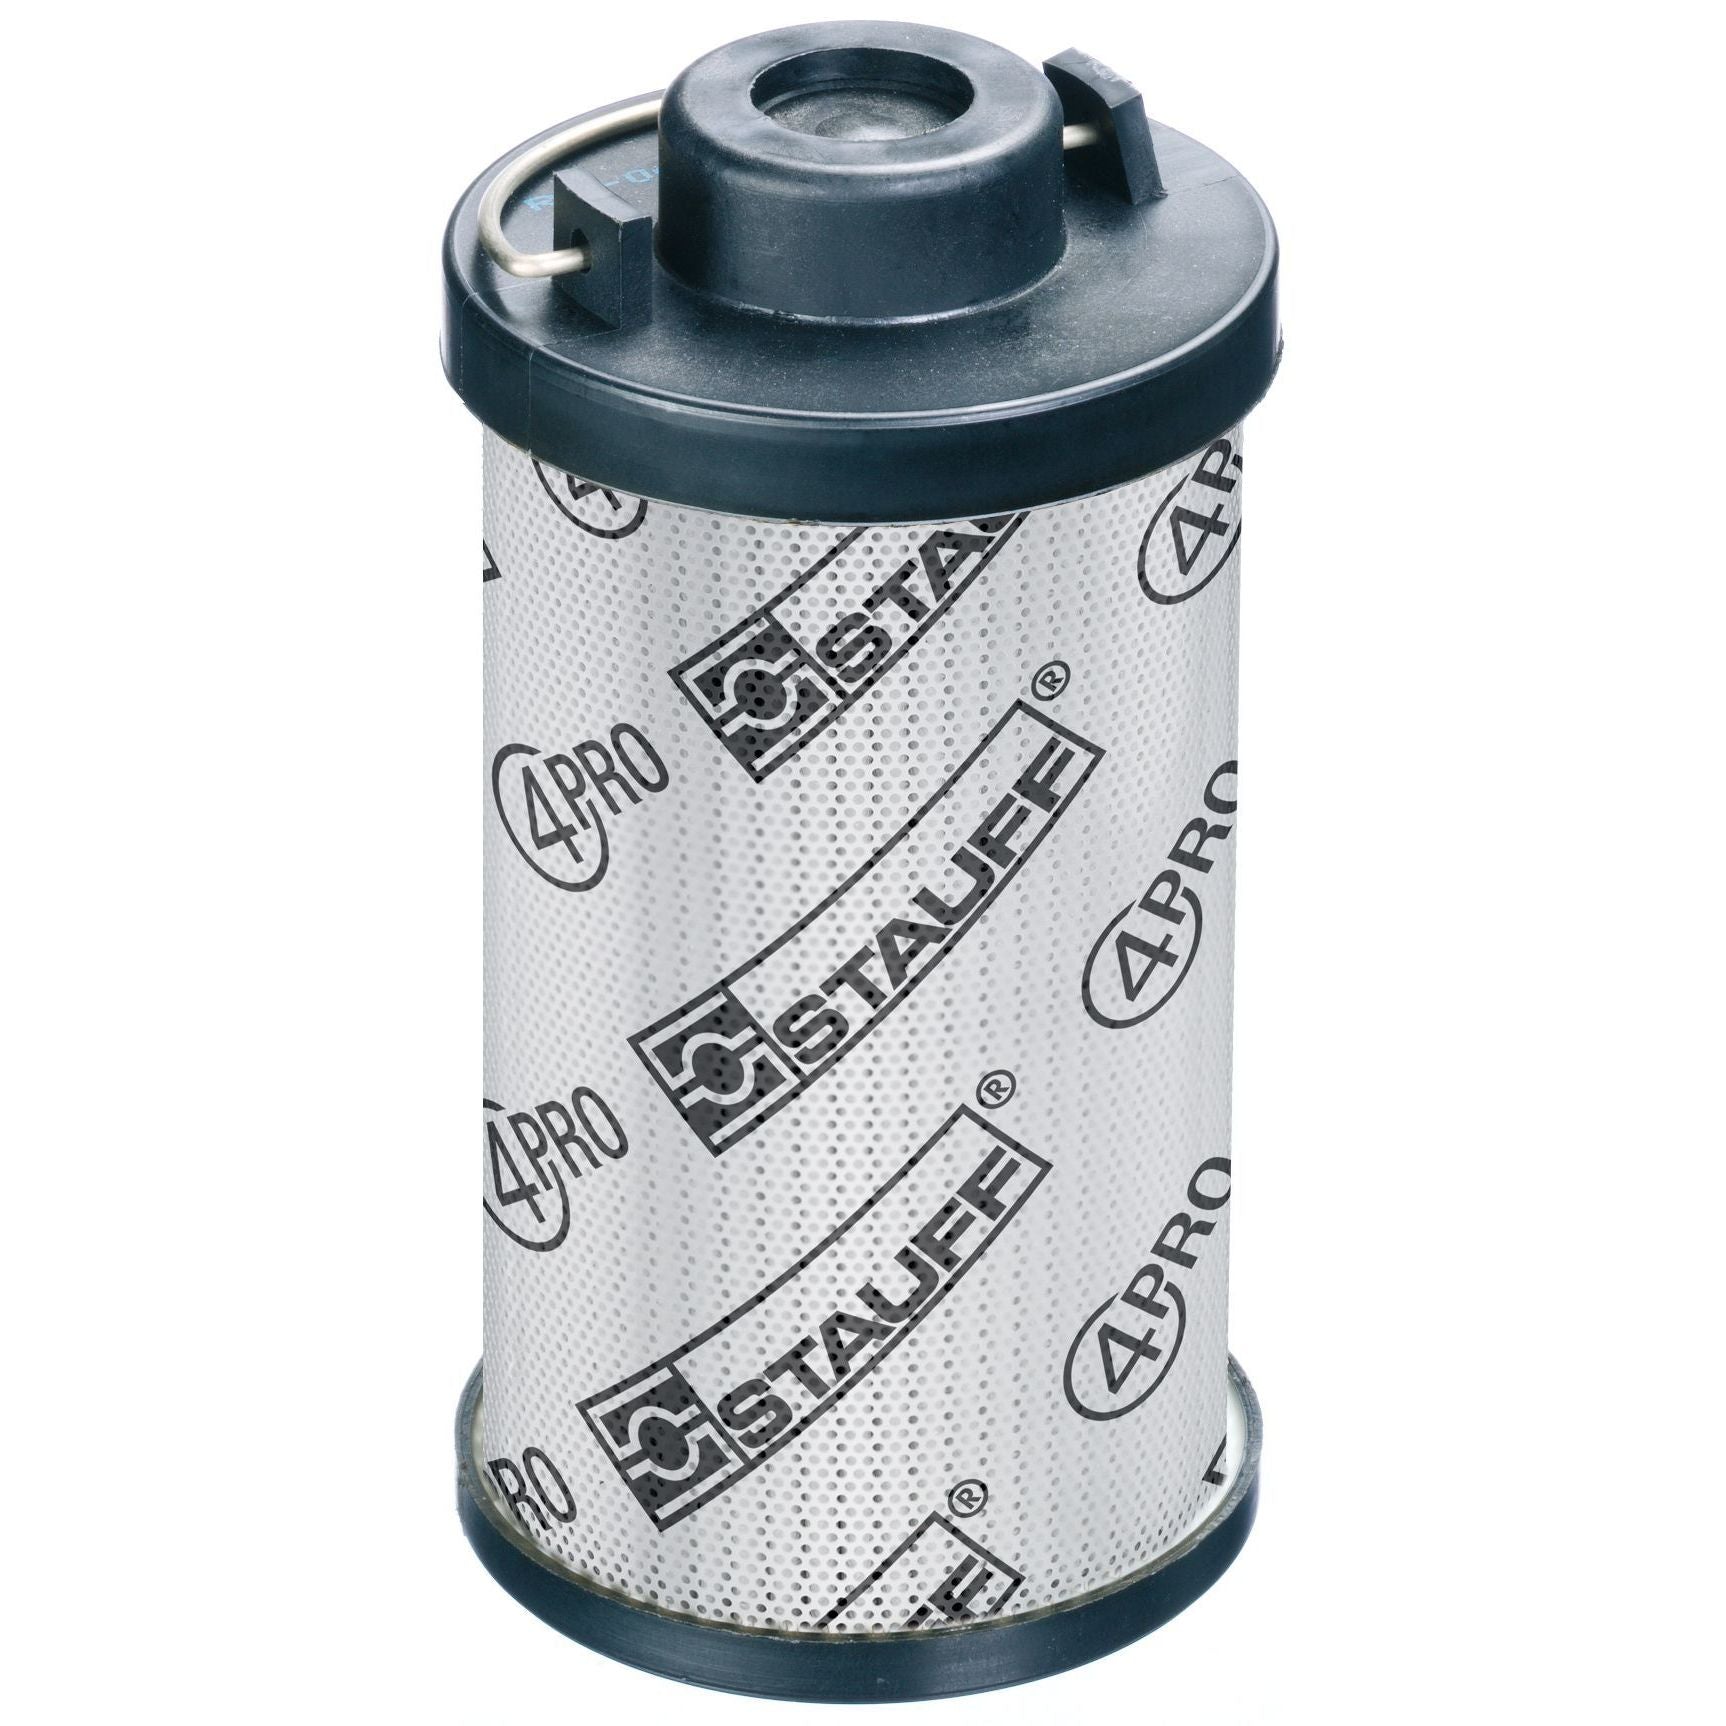 RE-160-G-05-B-B3/4 : Stauff RF-160 Series Filter Element, 5 Micron, Synthetic, 363psi Collapse Differential, Buna